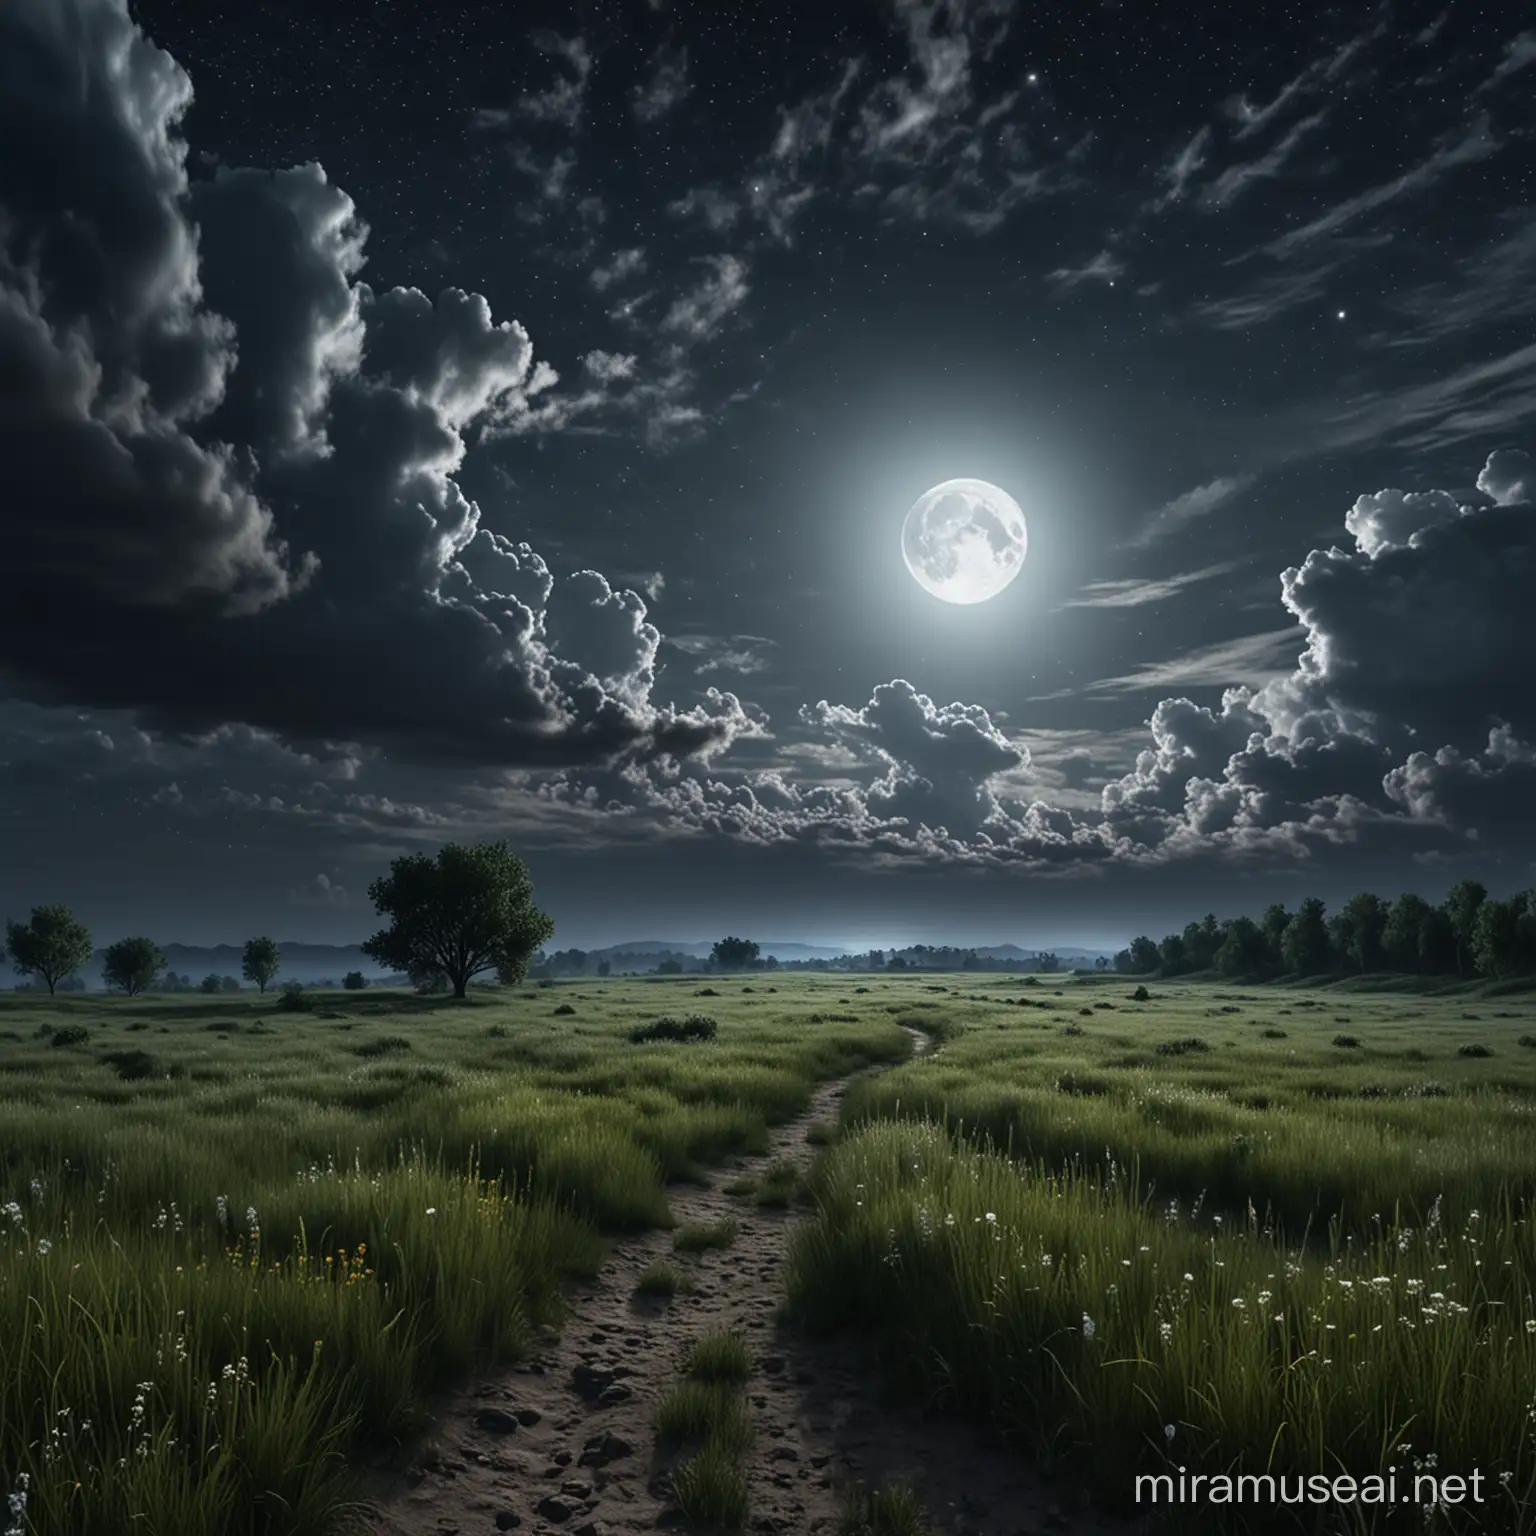 Moonlit Meadow at Night Serene Landscape under the Night Sky